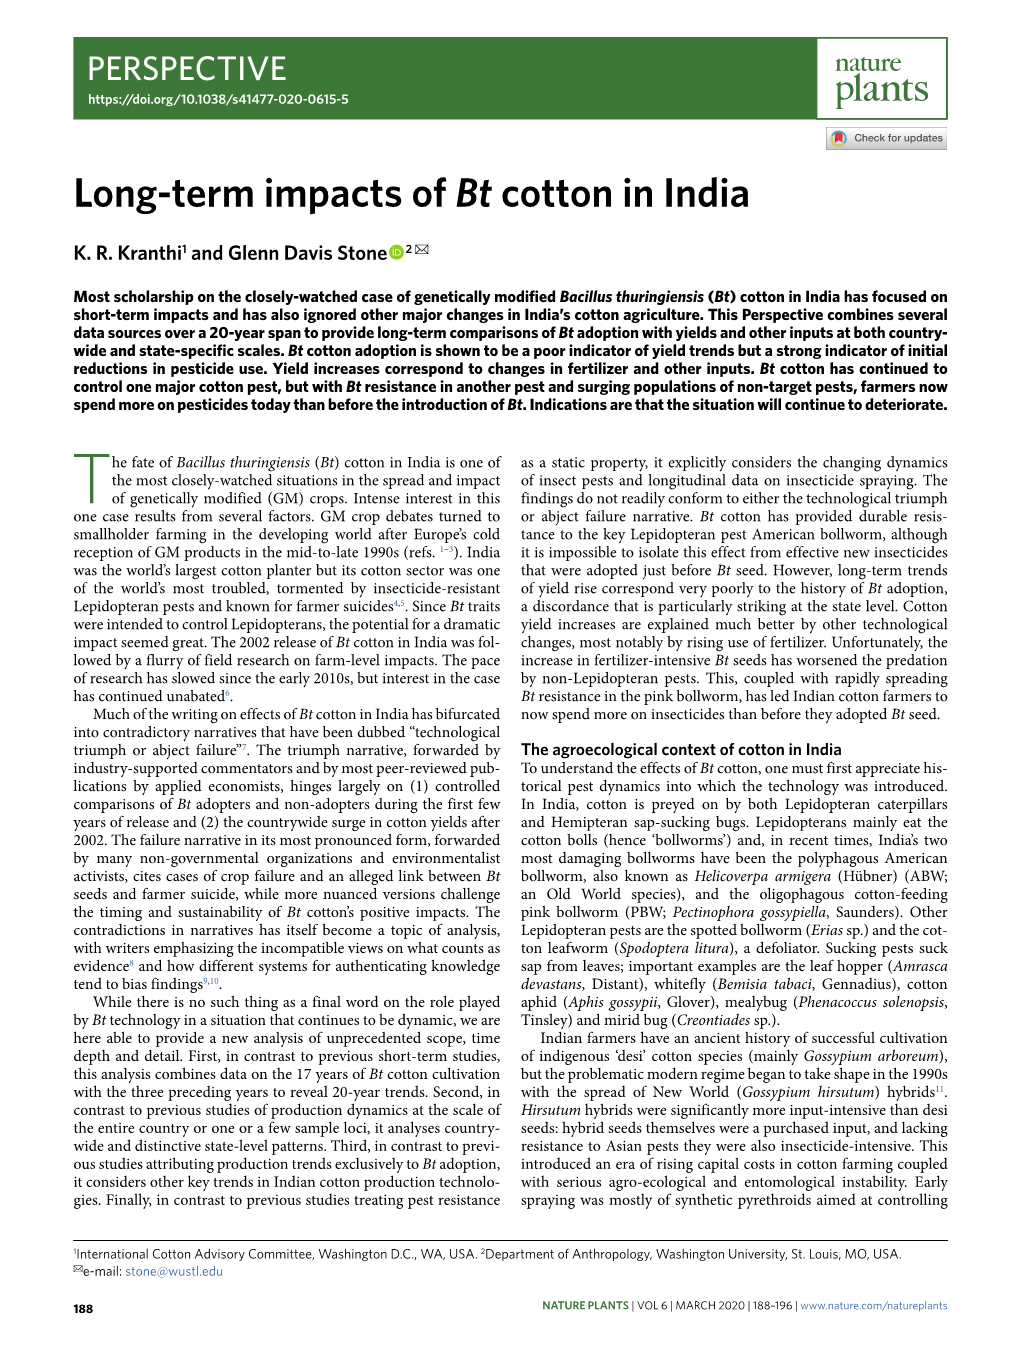 Long-Term Impacts of Bt Cotton in India